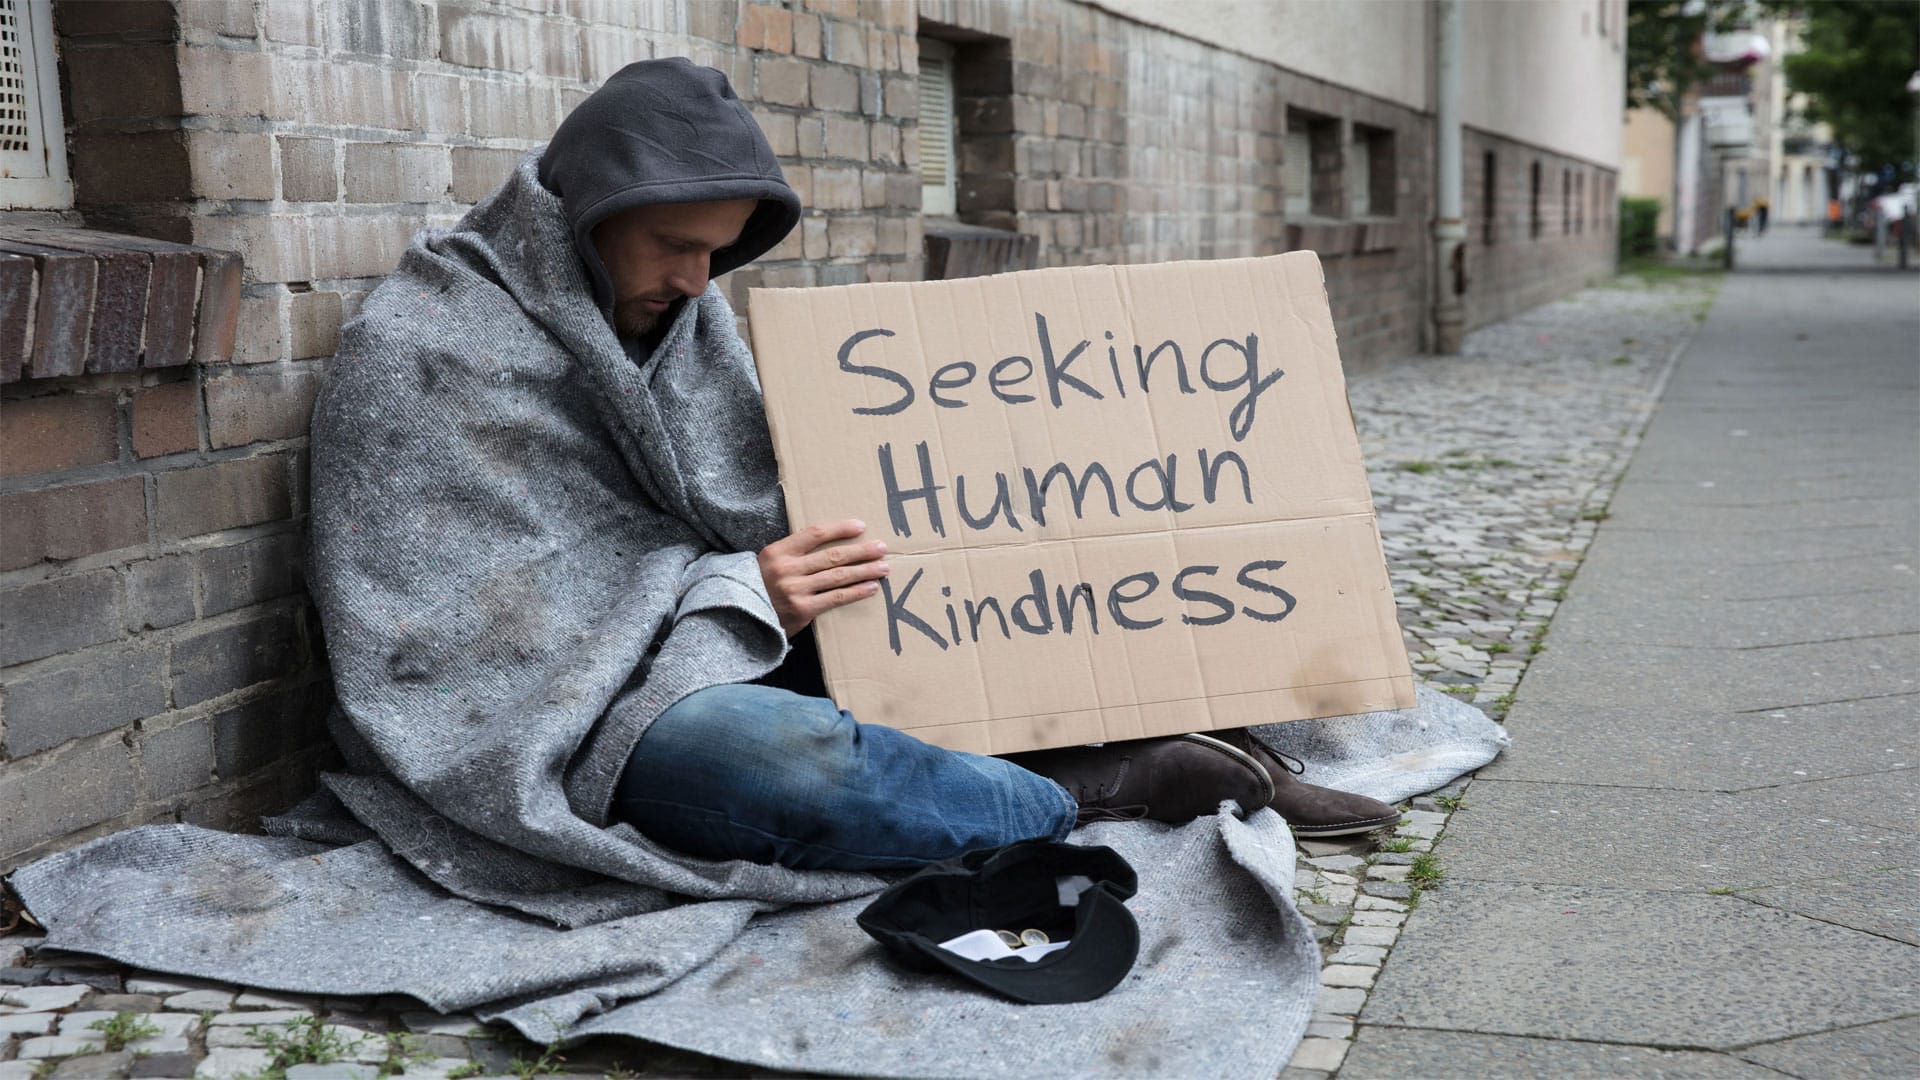 Christians approach to giving to street beggars